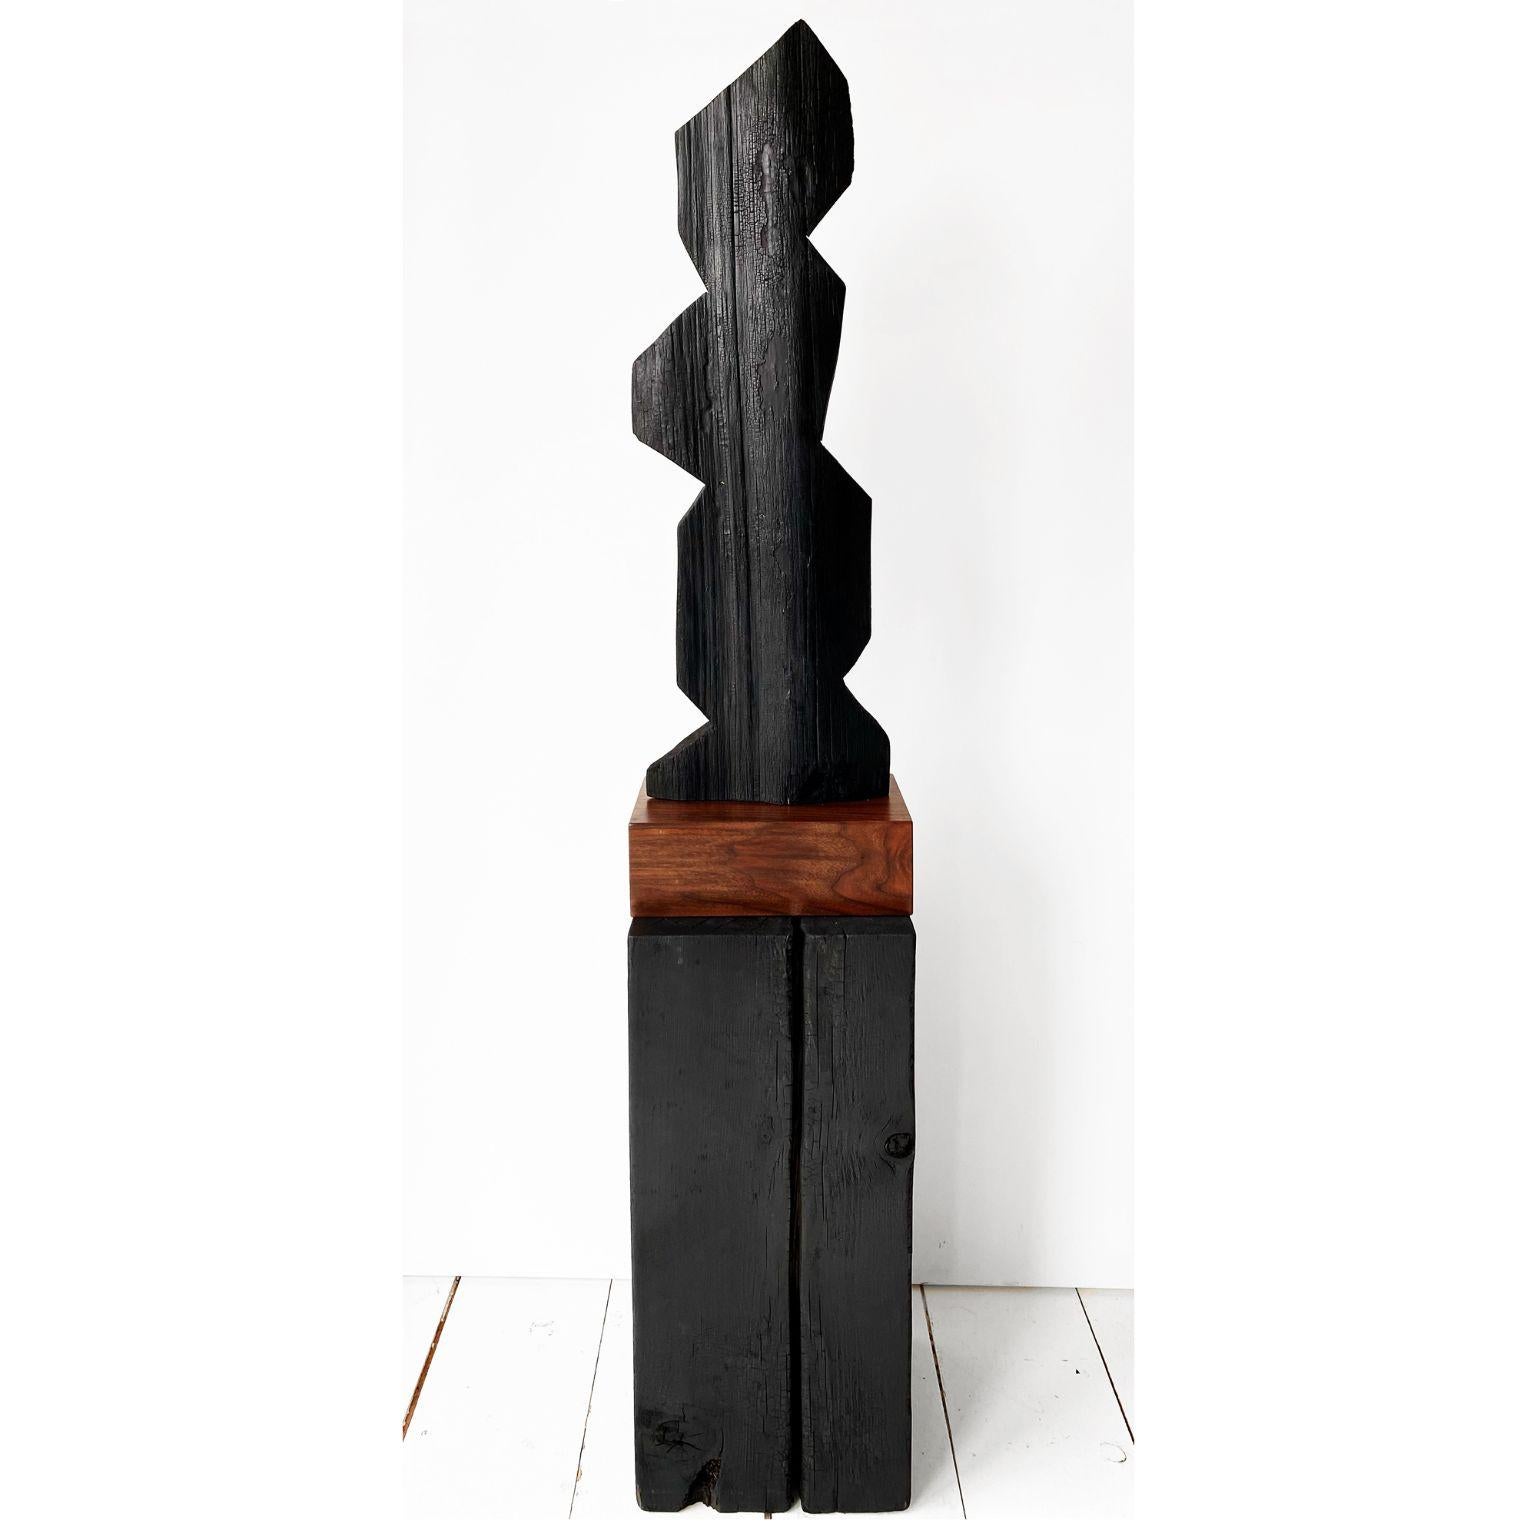 Untitled 34 by Neshka
Dimensions: 25 x 23 x 140 cm
Material: Charred cedar and cherry wood

Neshka ( Agnieszka Krusche ), is a native of Kraków, Poland, and a graduate of Alberta University of the Arts in Calgary, Canada.
Since graduating from